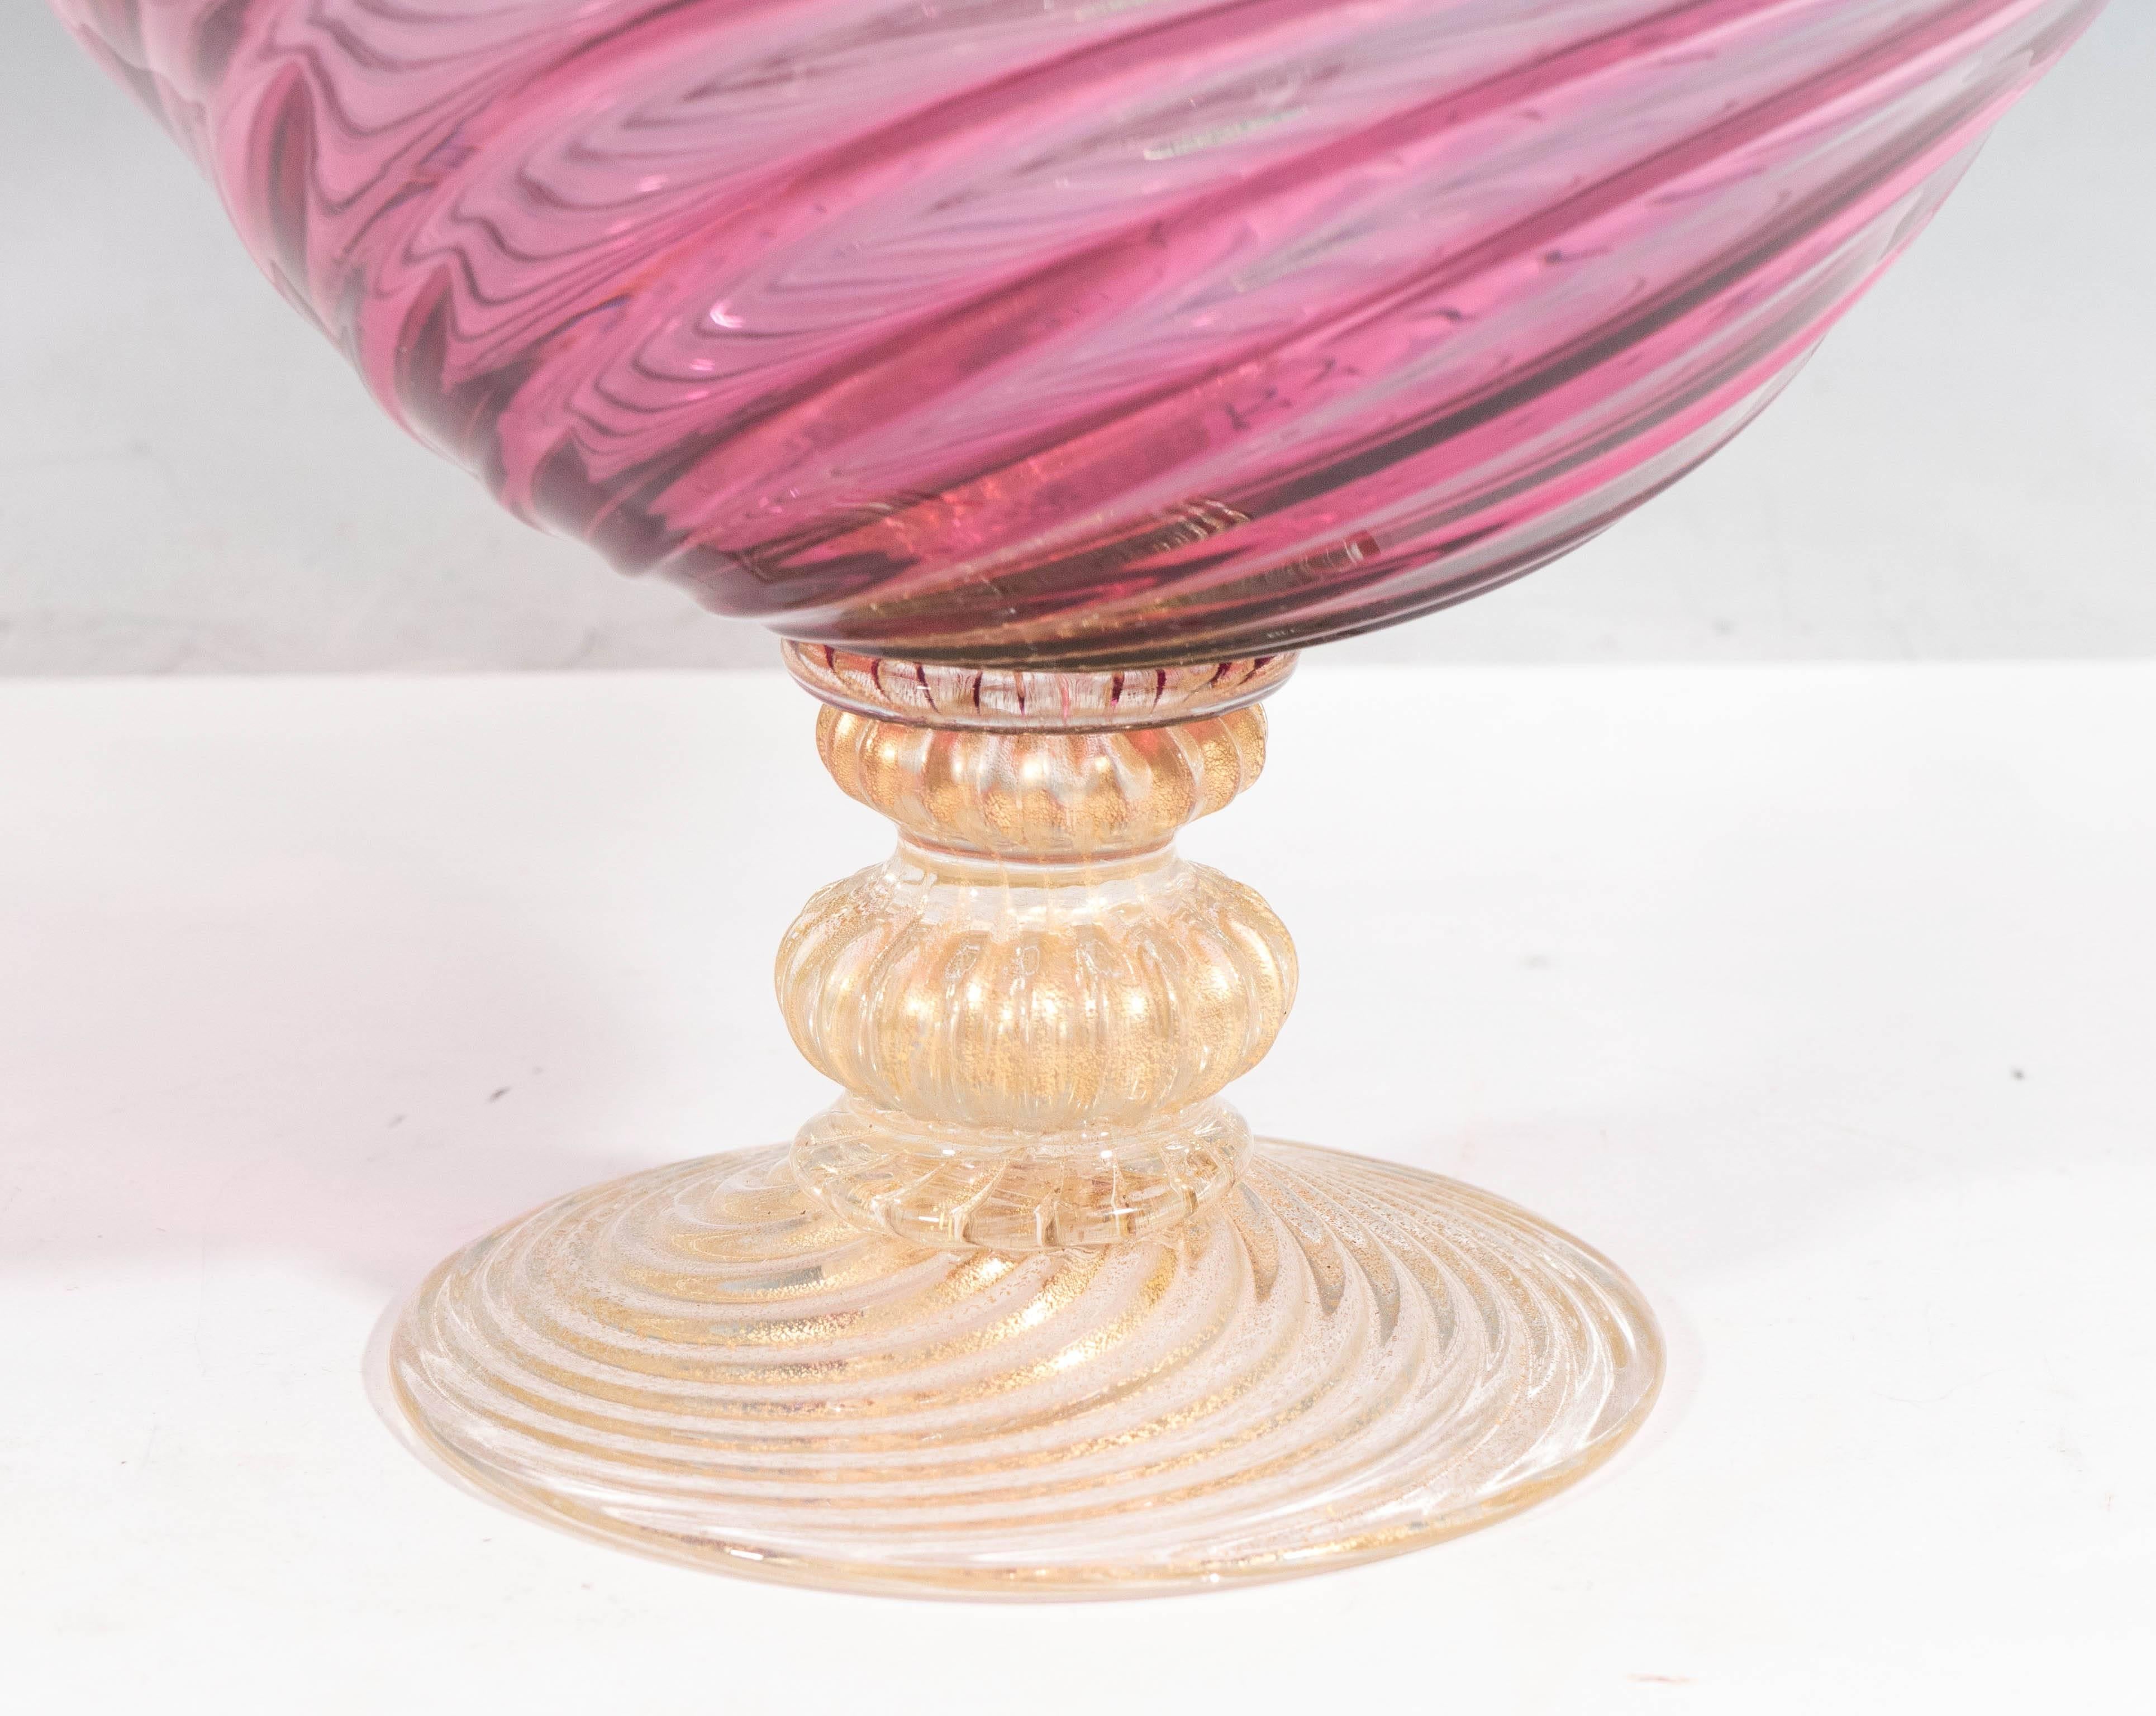 An Italian vintage glass bowl in pink, produced in Venice by Vetreria Fratelli Toso, circa 1960s, with frilled detail to the rim, over the fluted swirled body, raised on a pedestal base, infused with gold flakes. Marked with labels [Venetian